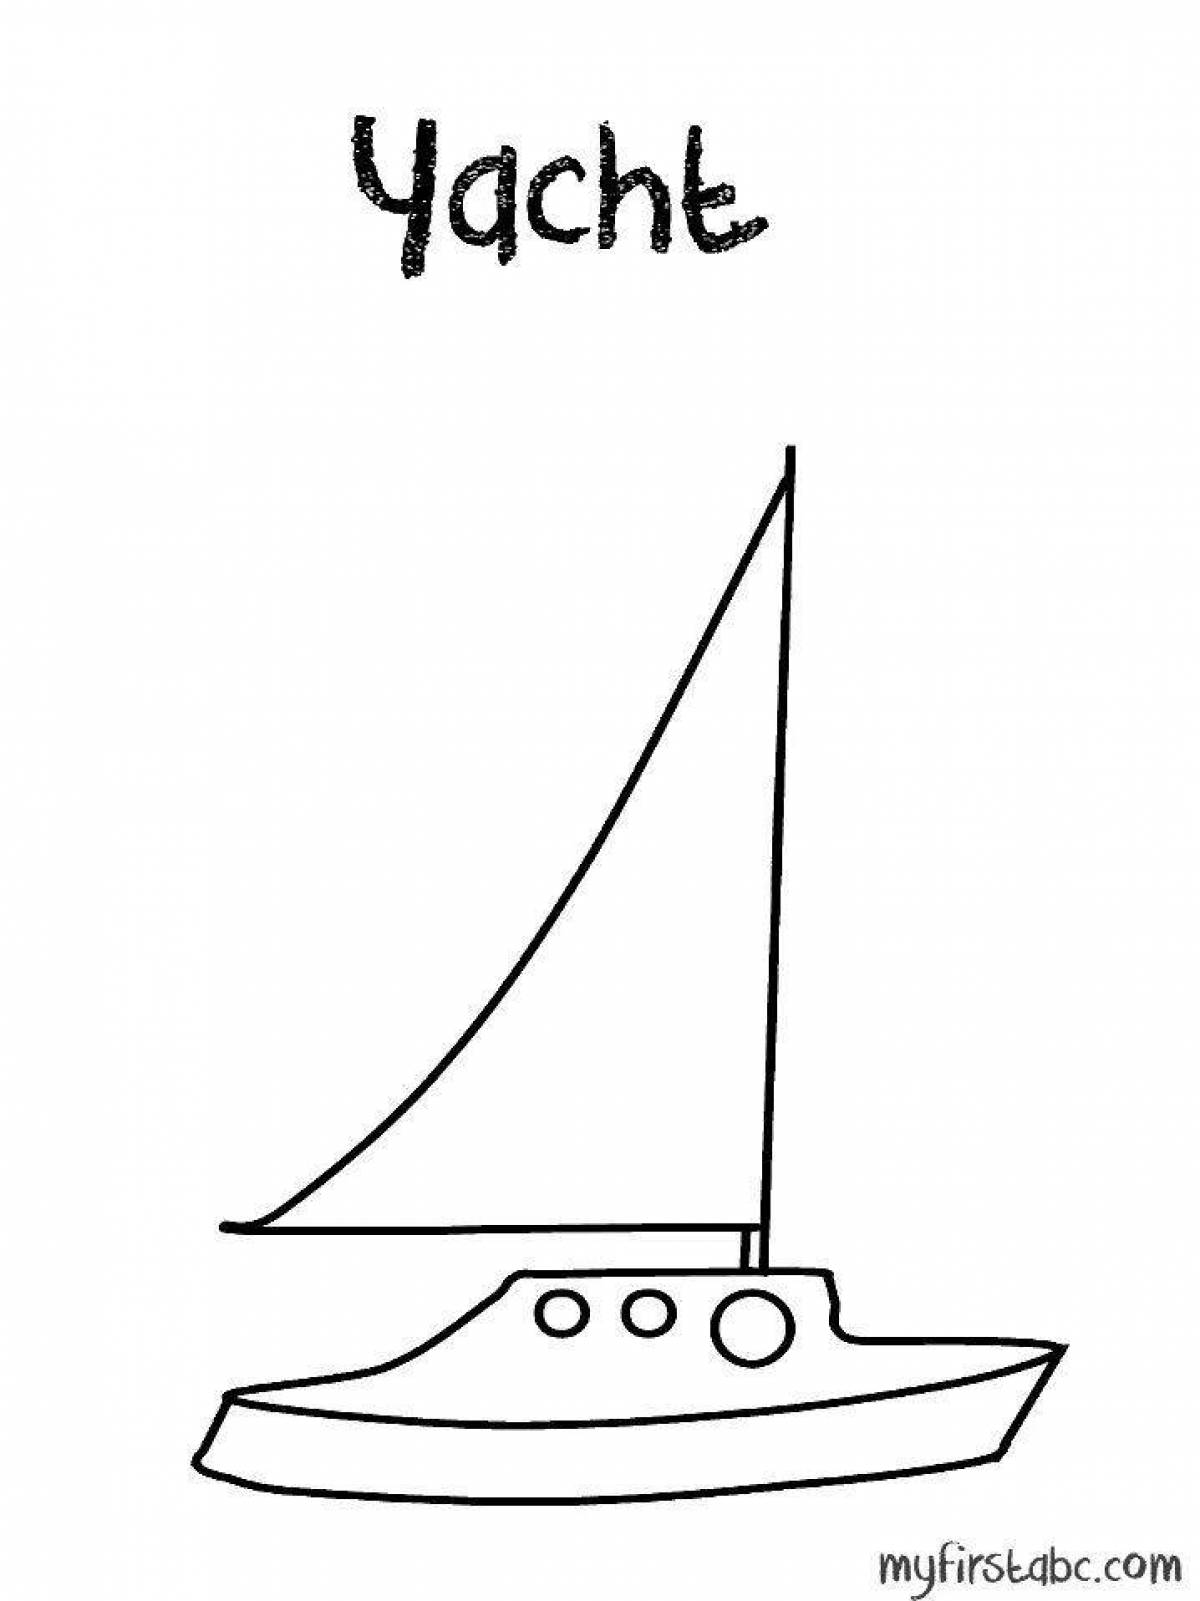 A playful yacht coloring page for toddlers